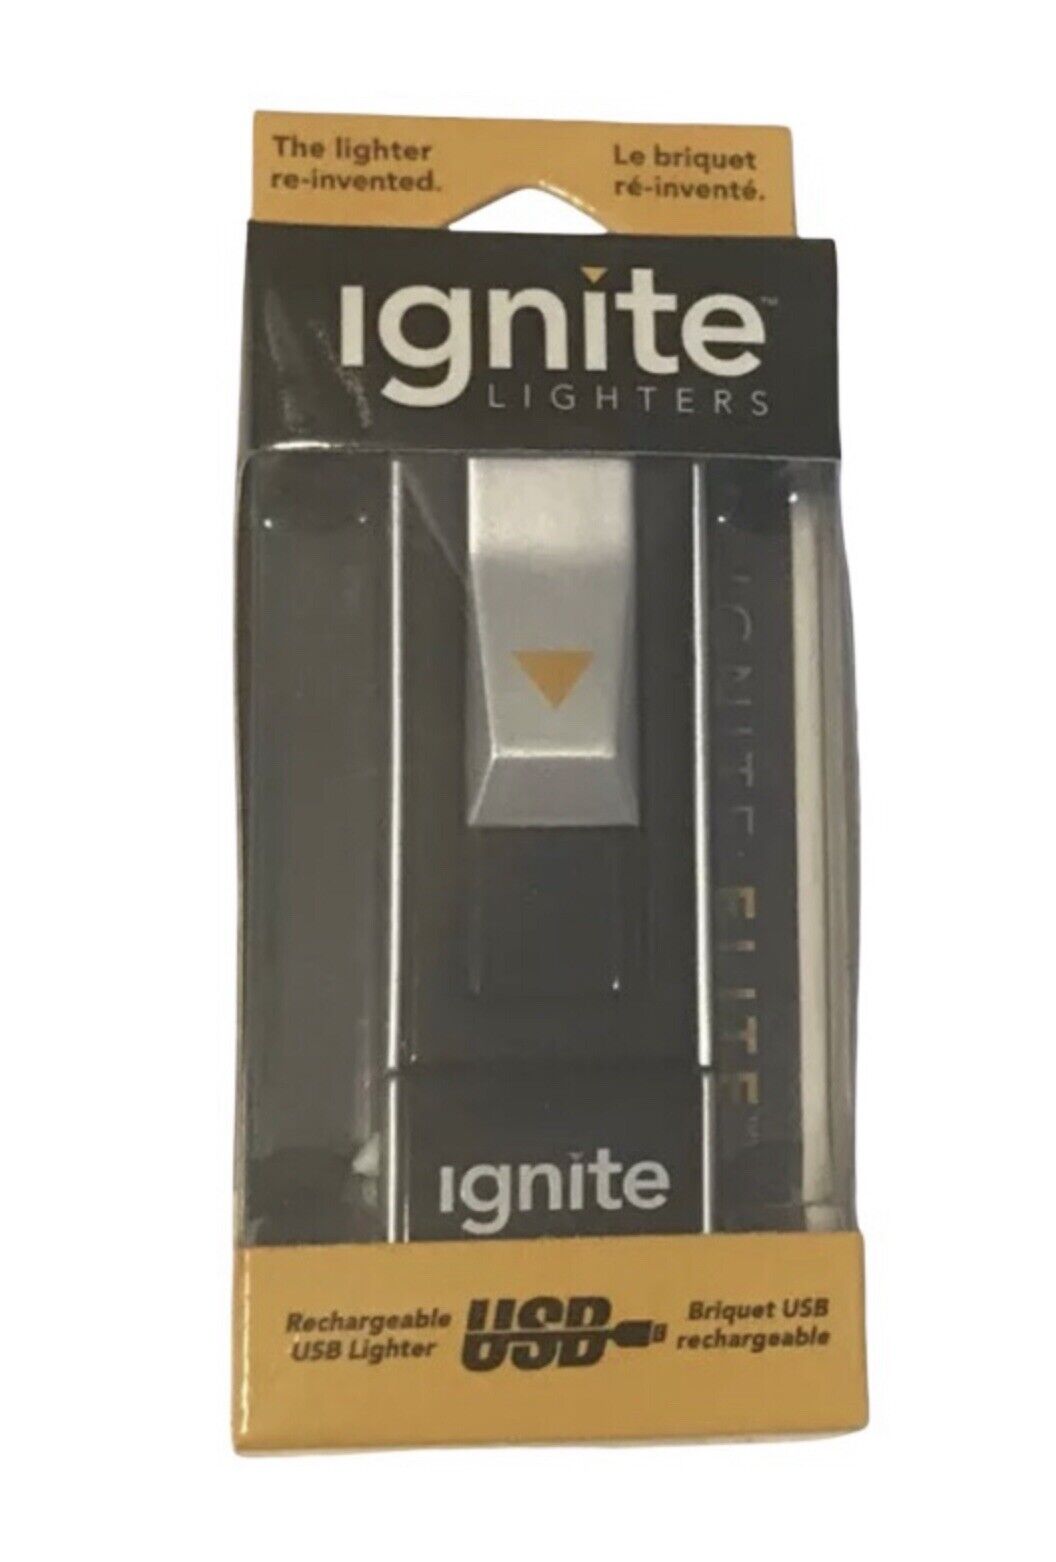 Ignite E-Data Rechargeable USB Flameless All Weather Lighter. New In Box.  F